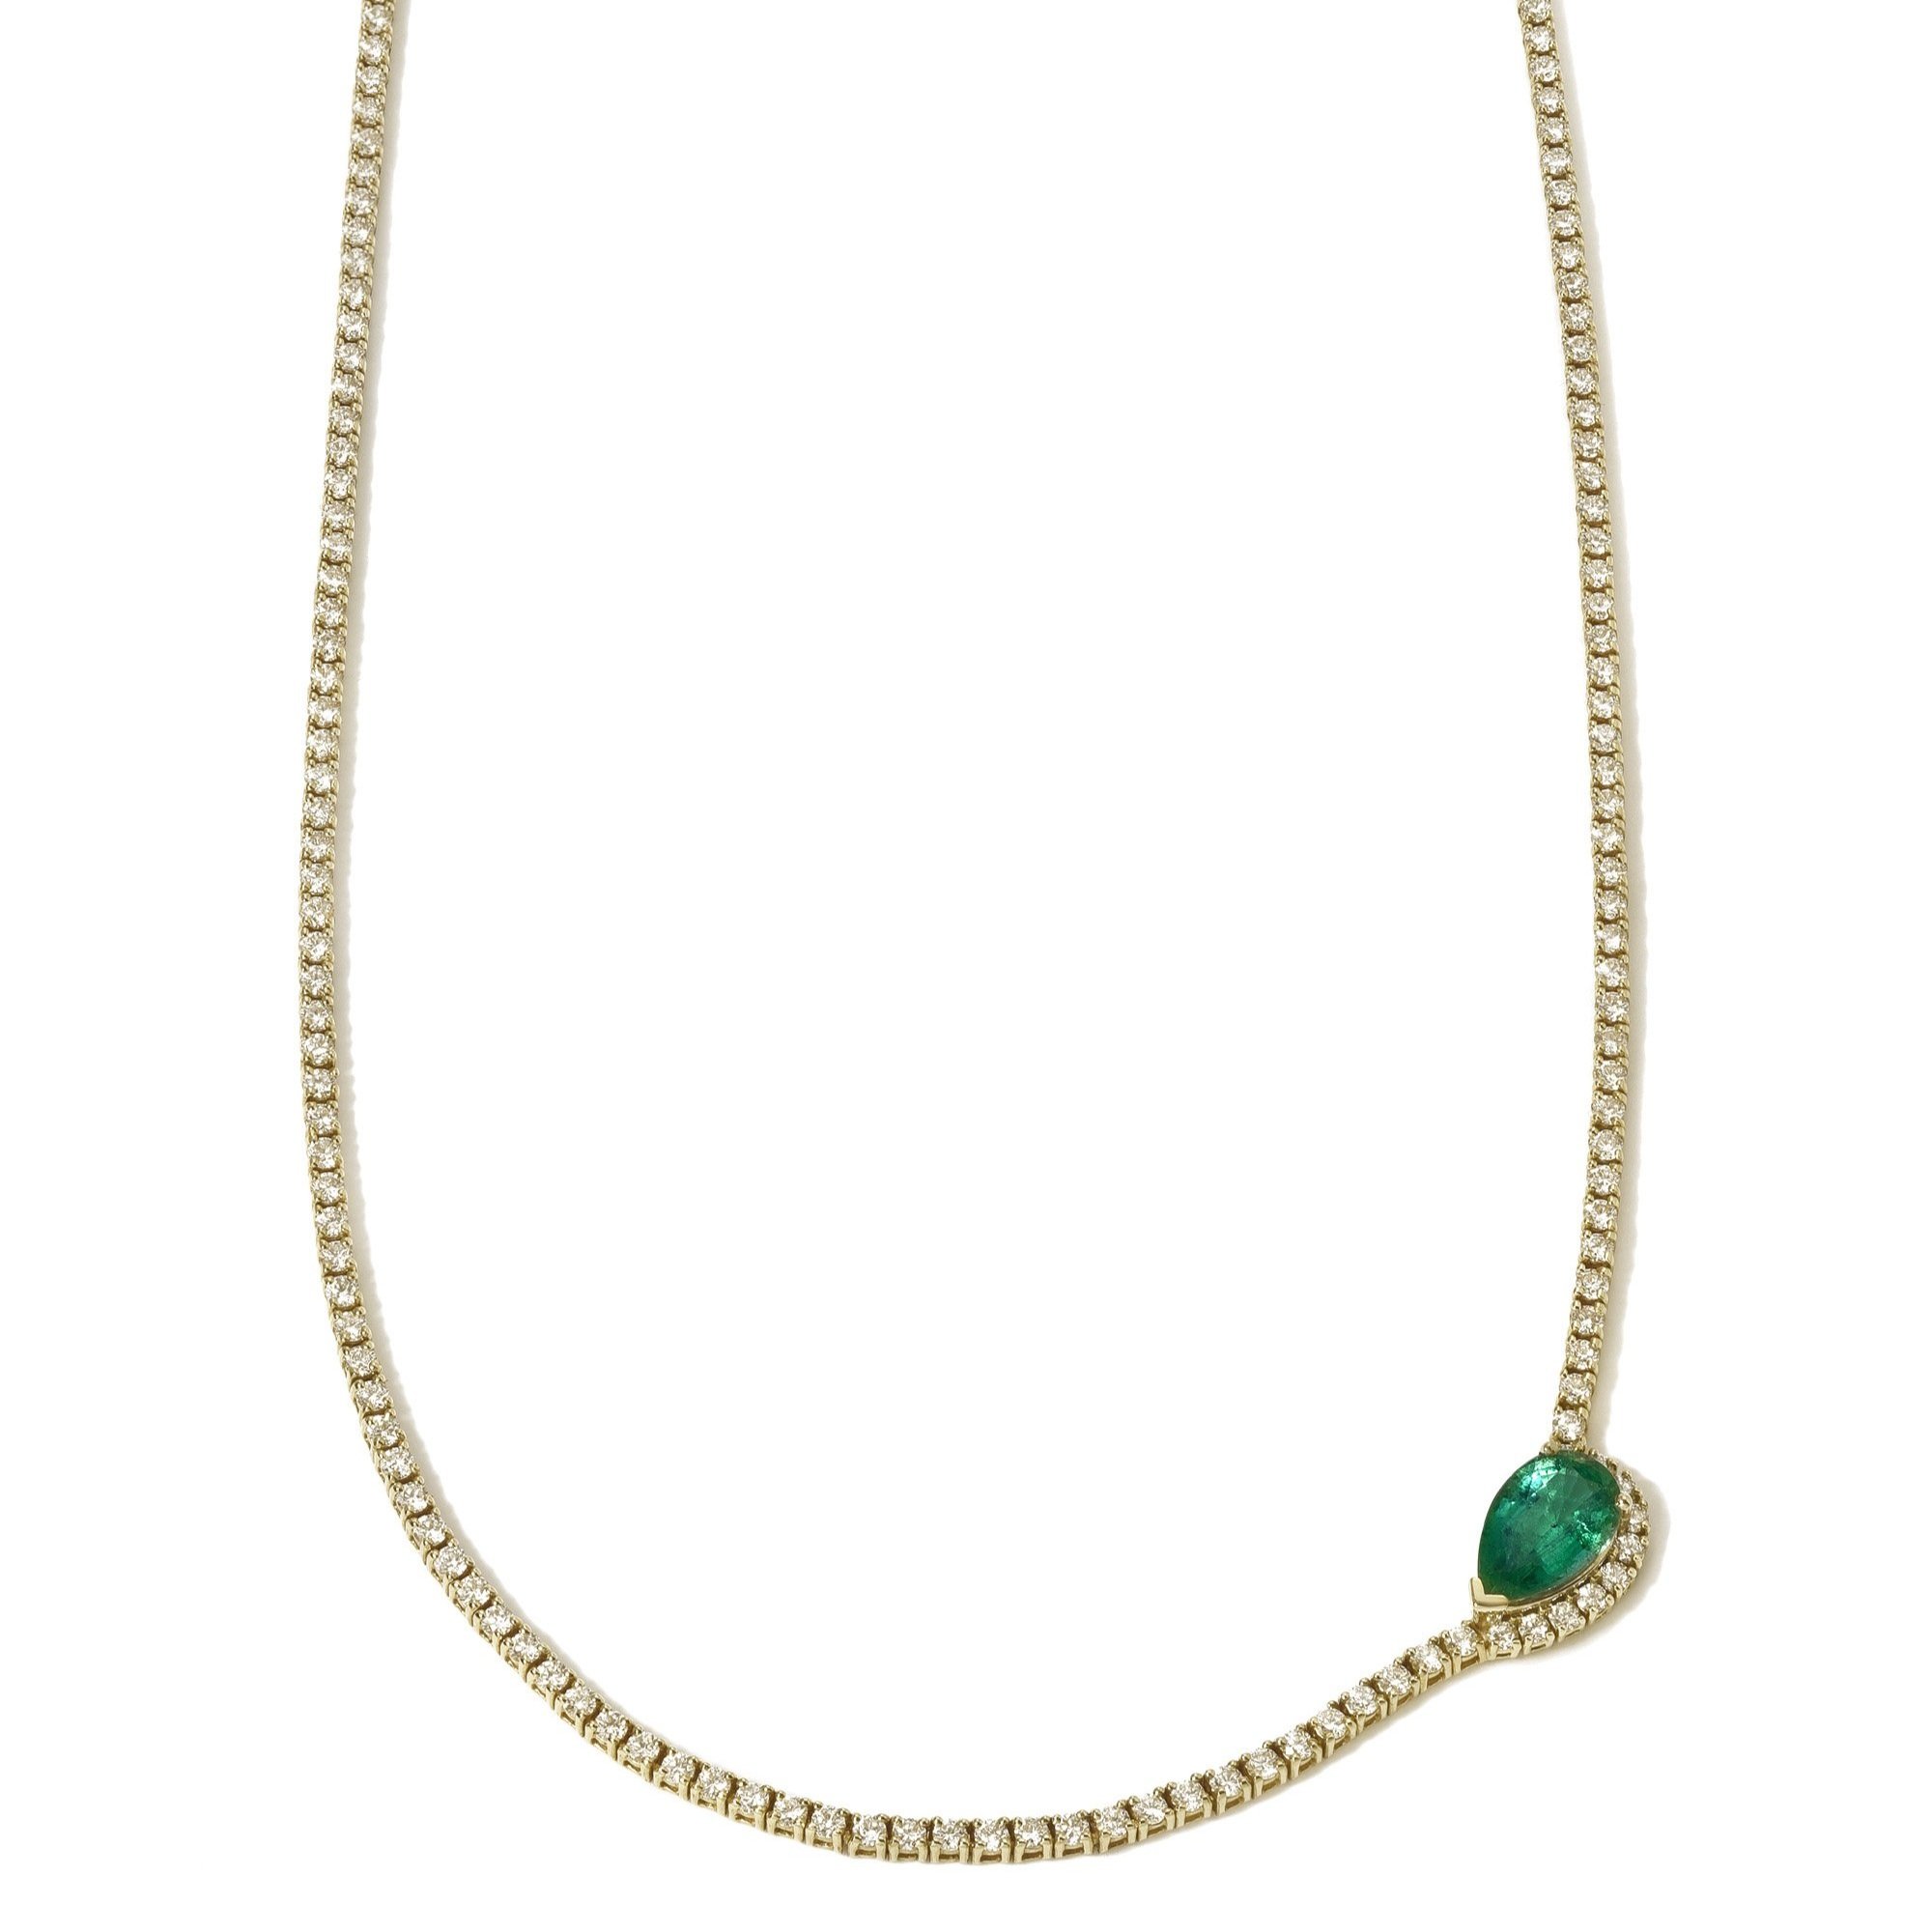 The piece Francesca is coveting next: KATKIM's Trace diamond and emerald pear tennis necklace